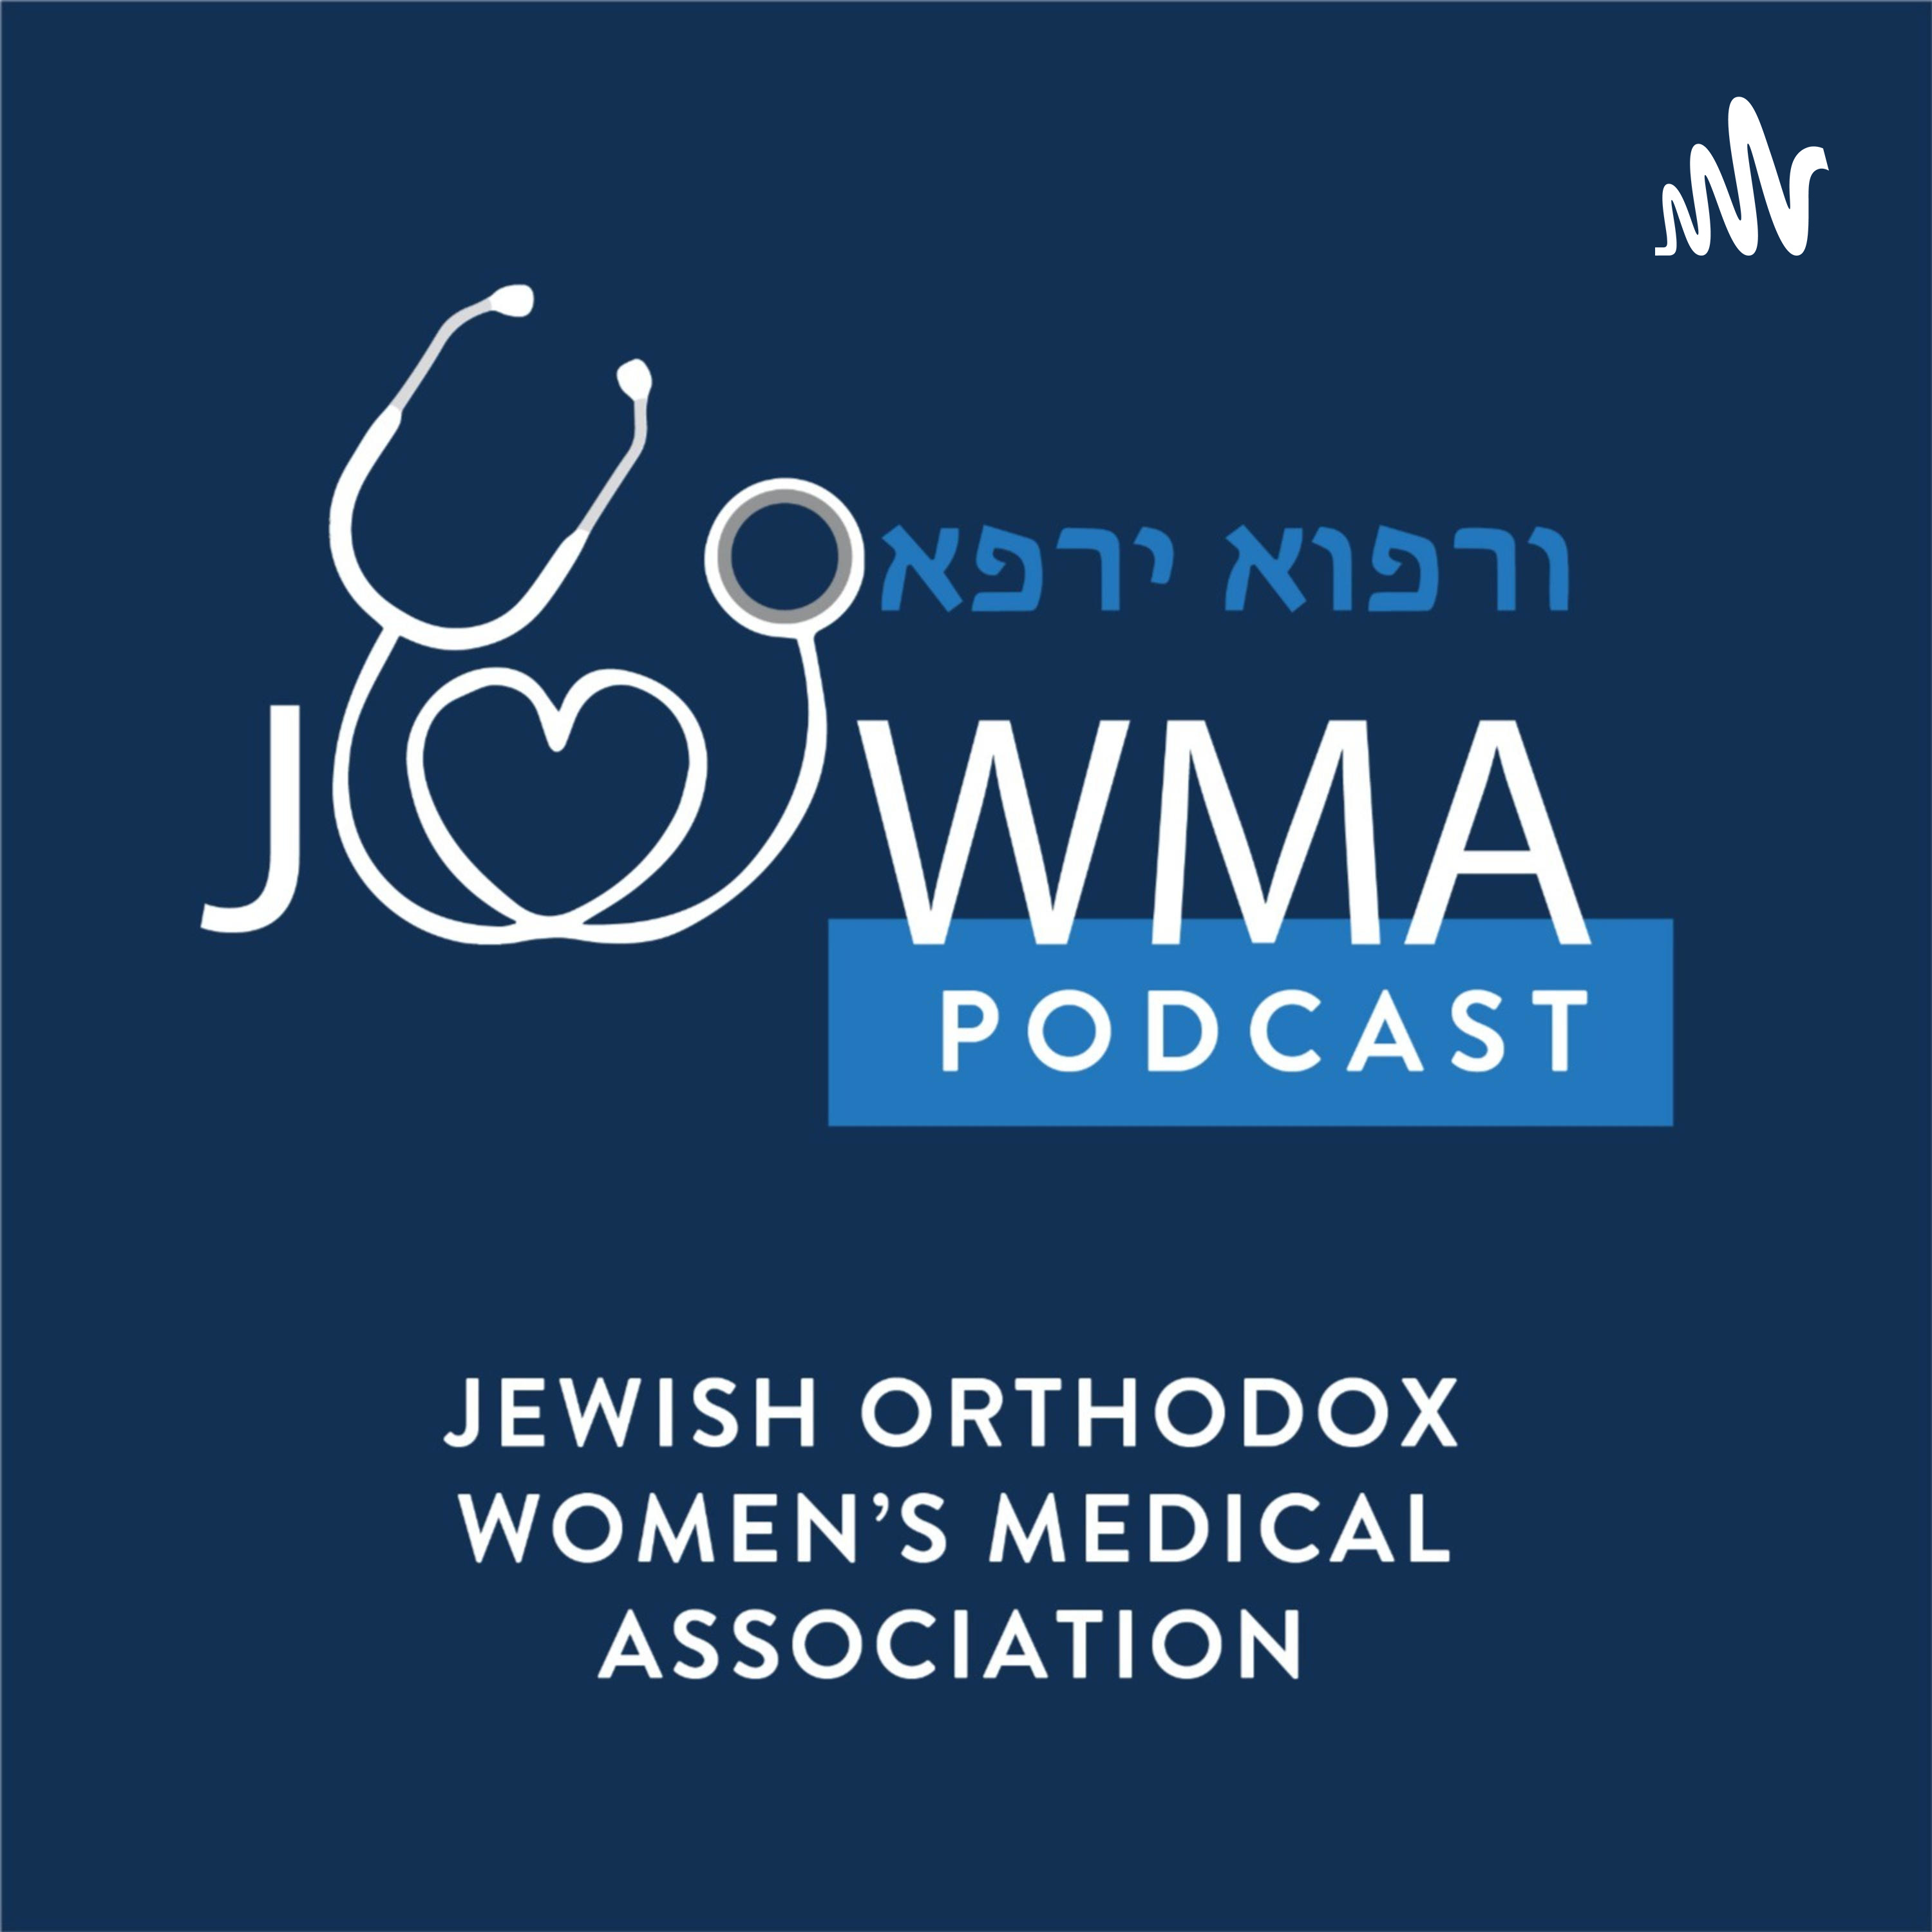 What You Need to Know About Colorectal Cancer Screening with Dr. Meira Abramowitz